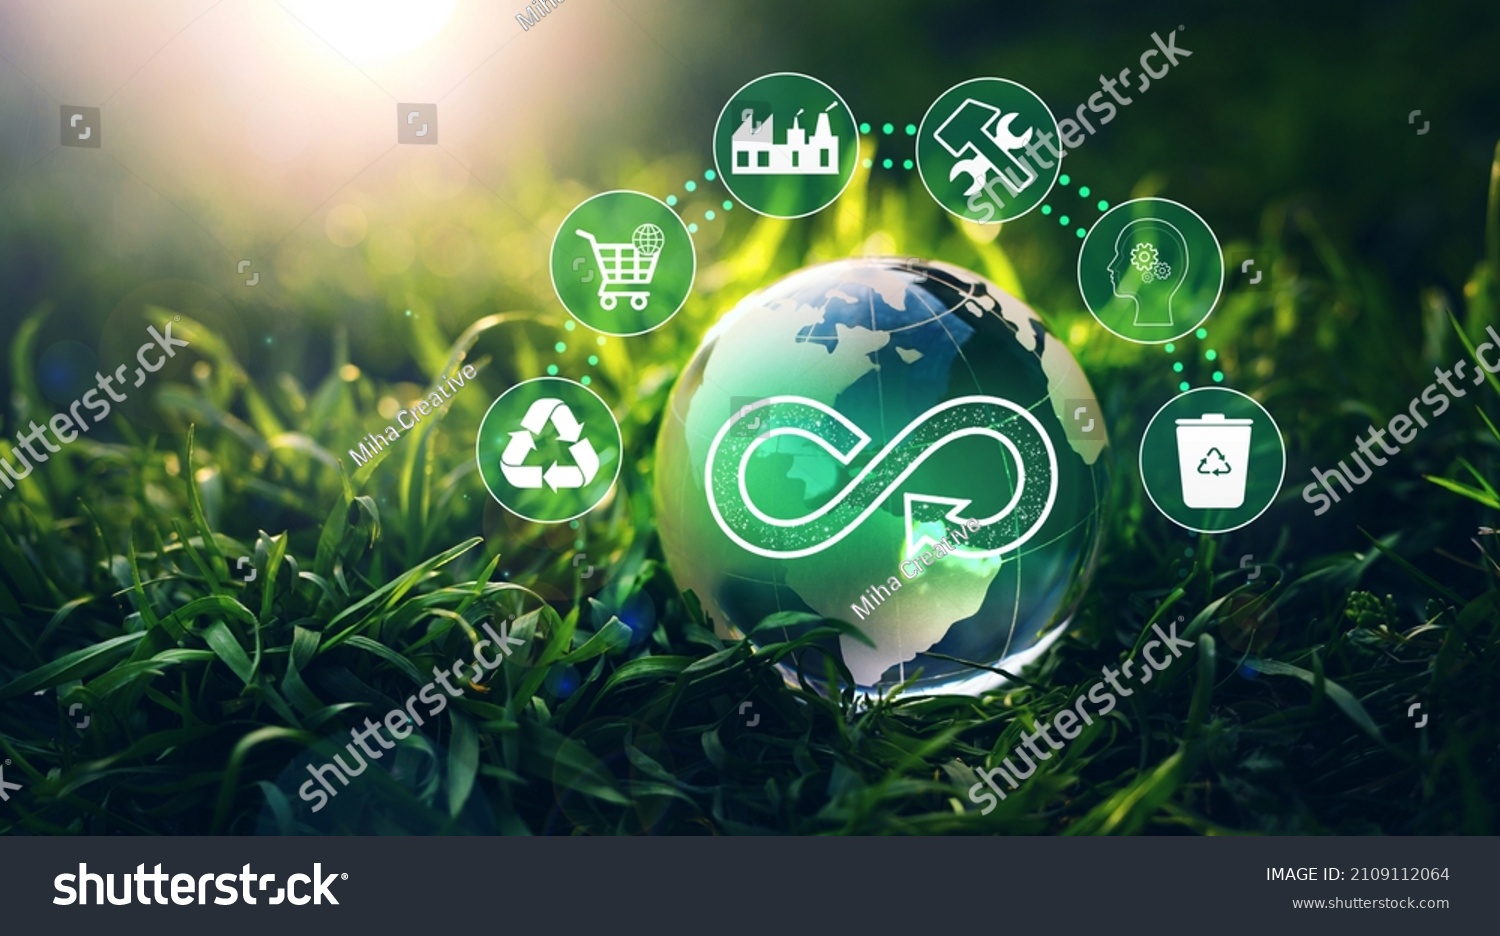 Circular economy concept. Energy consumption and CO2 emissions are increasing.
Sharing,reusing,repairing,renovating and recycling existing materials and products as much possible. #2109112064